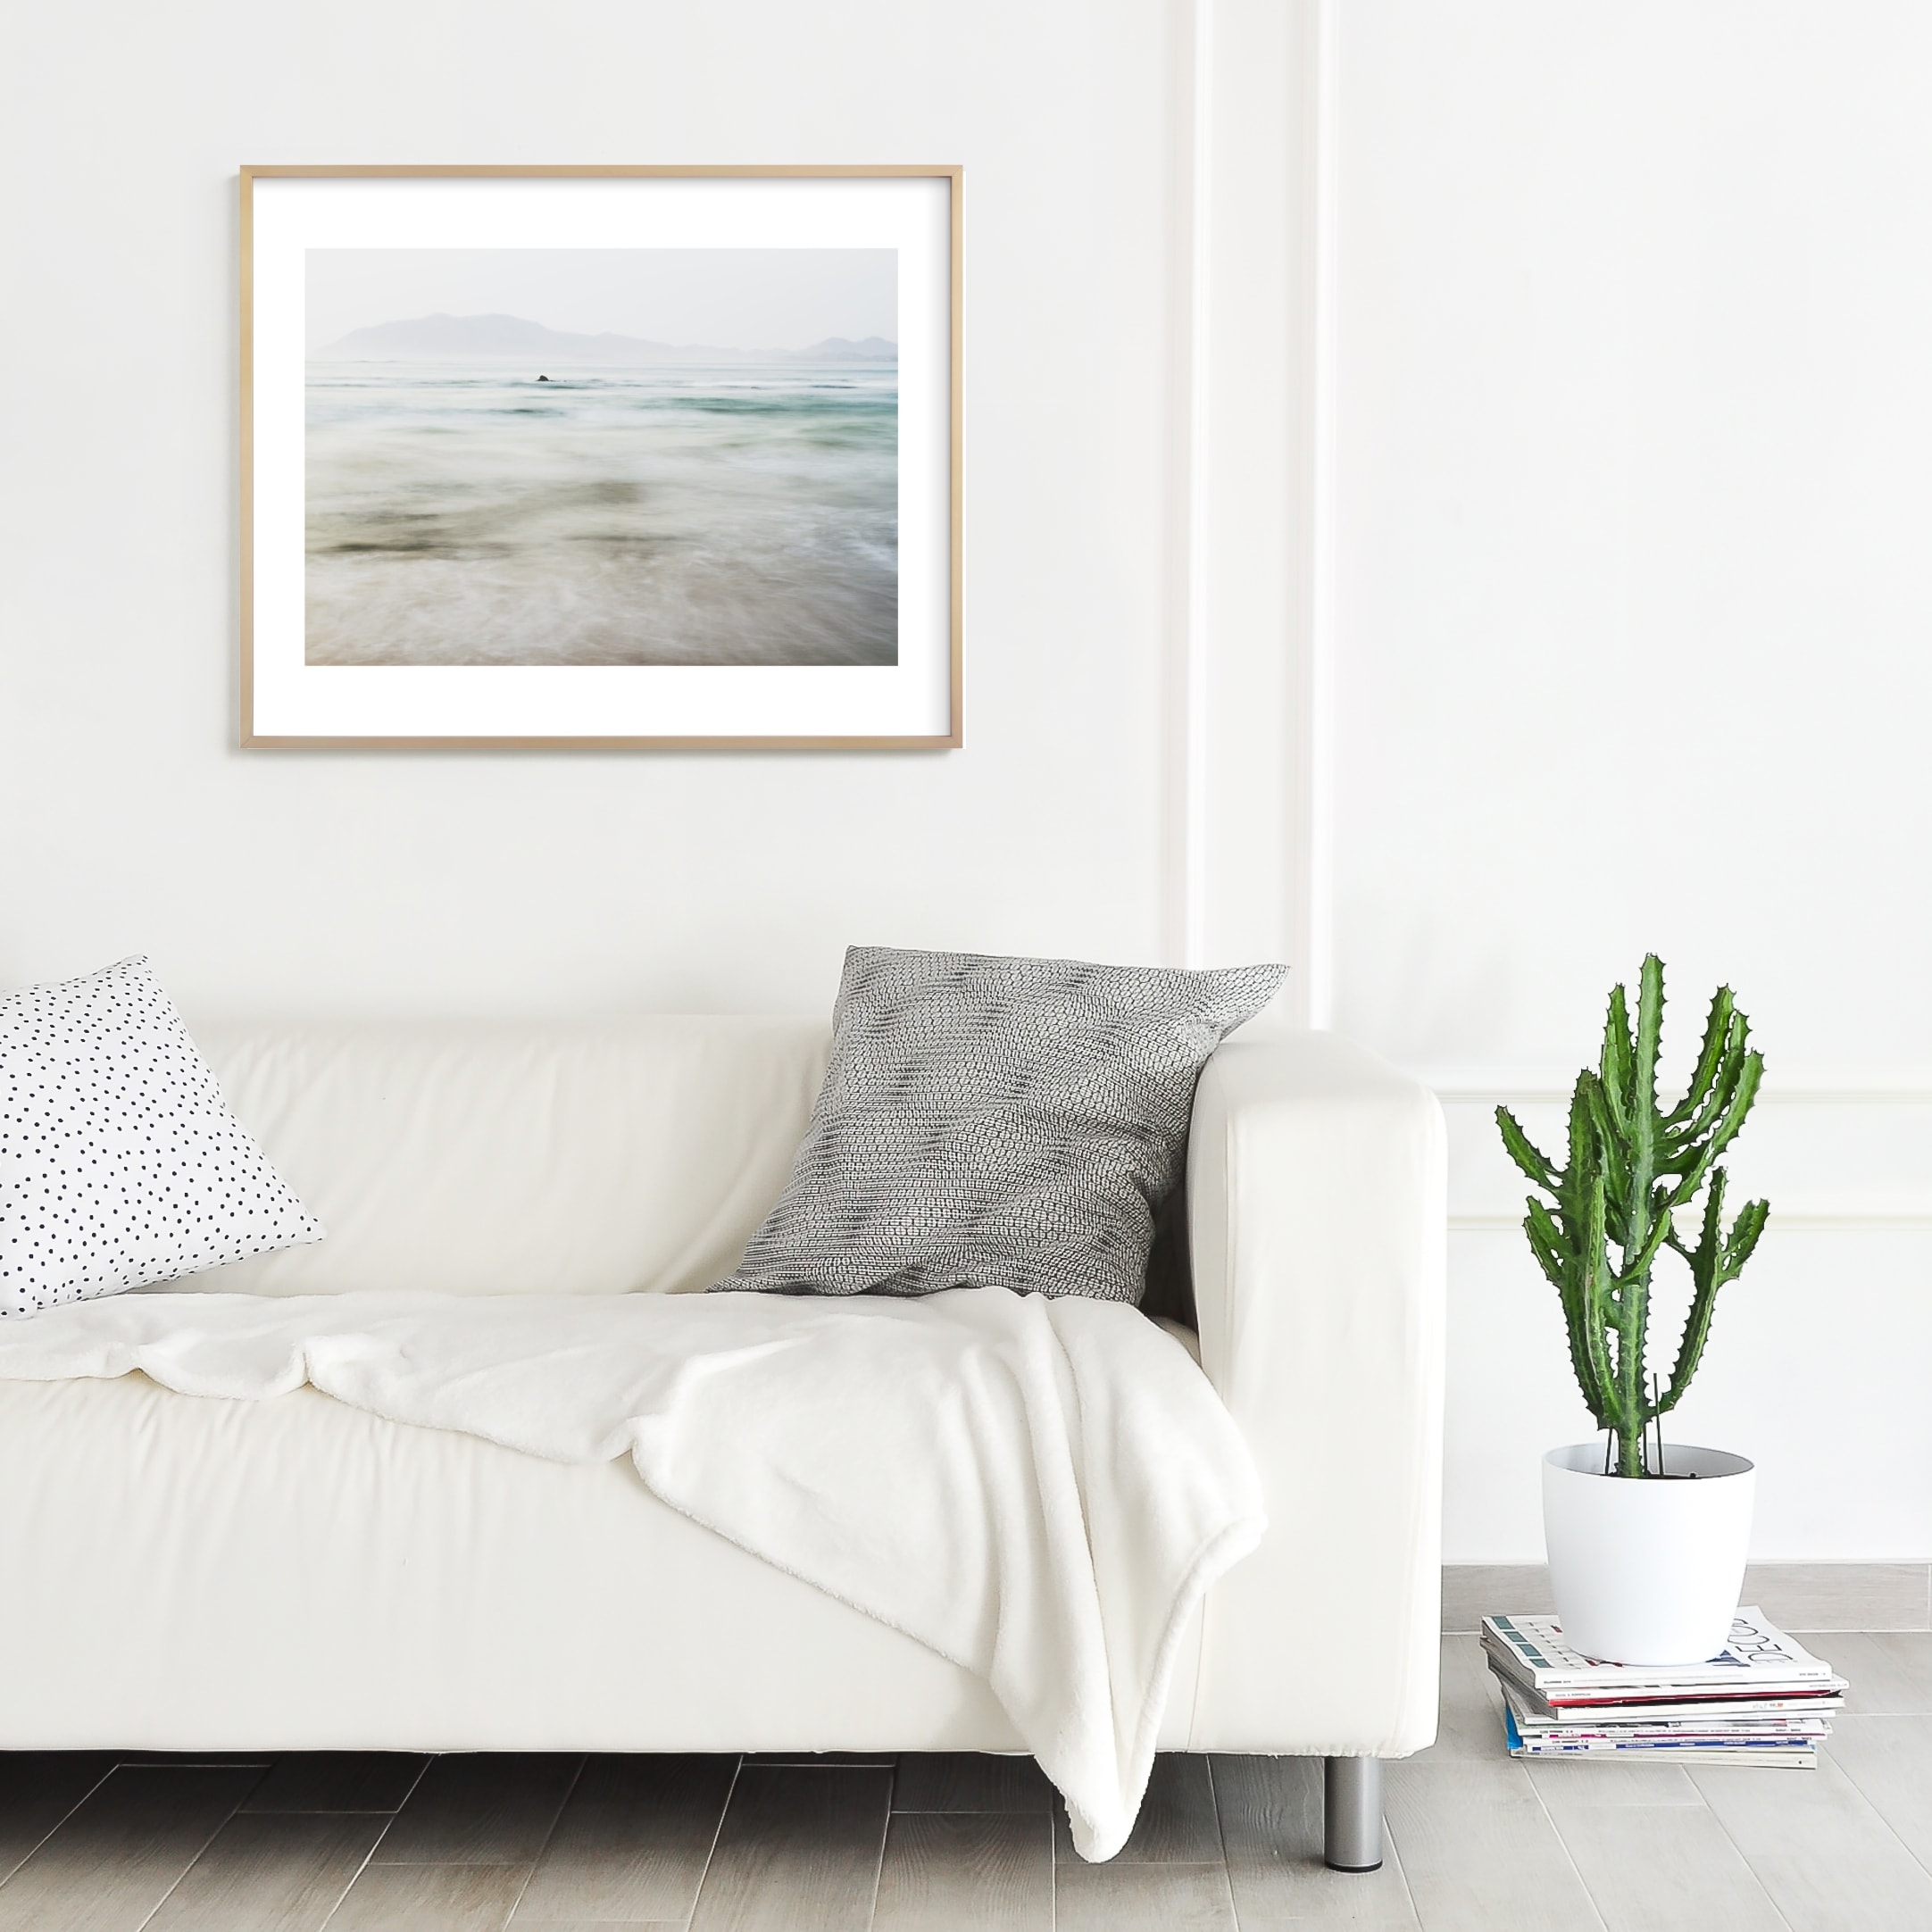 The Pacific Wall Art Print - Image 1